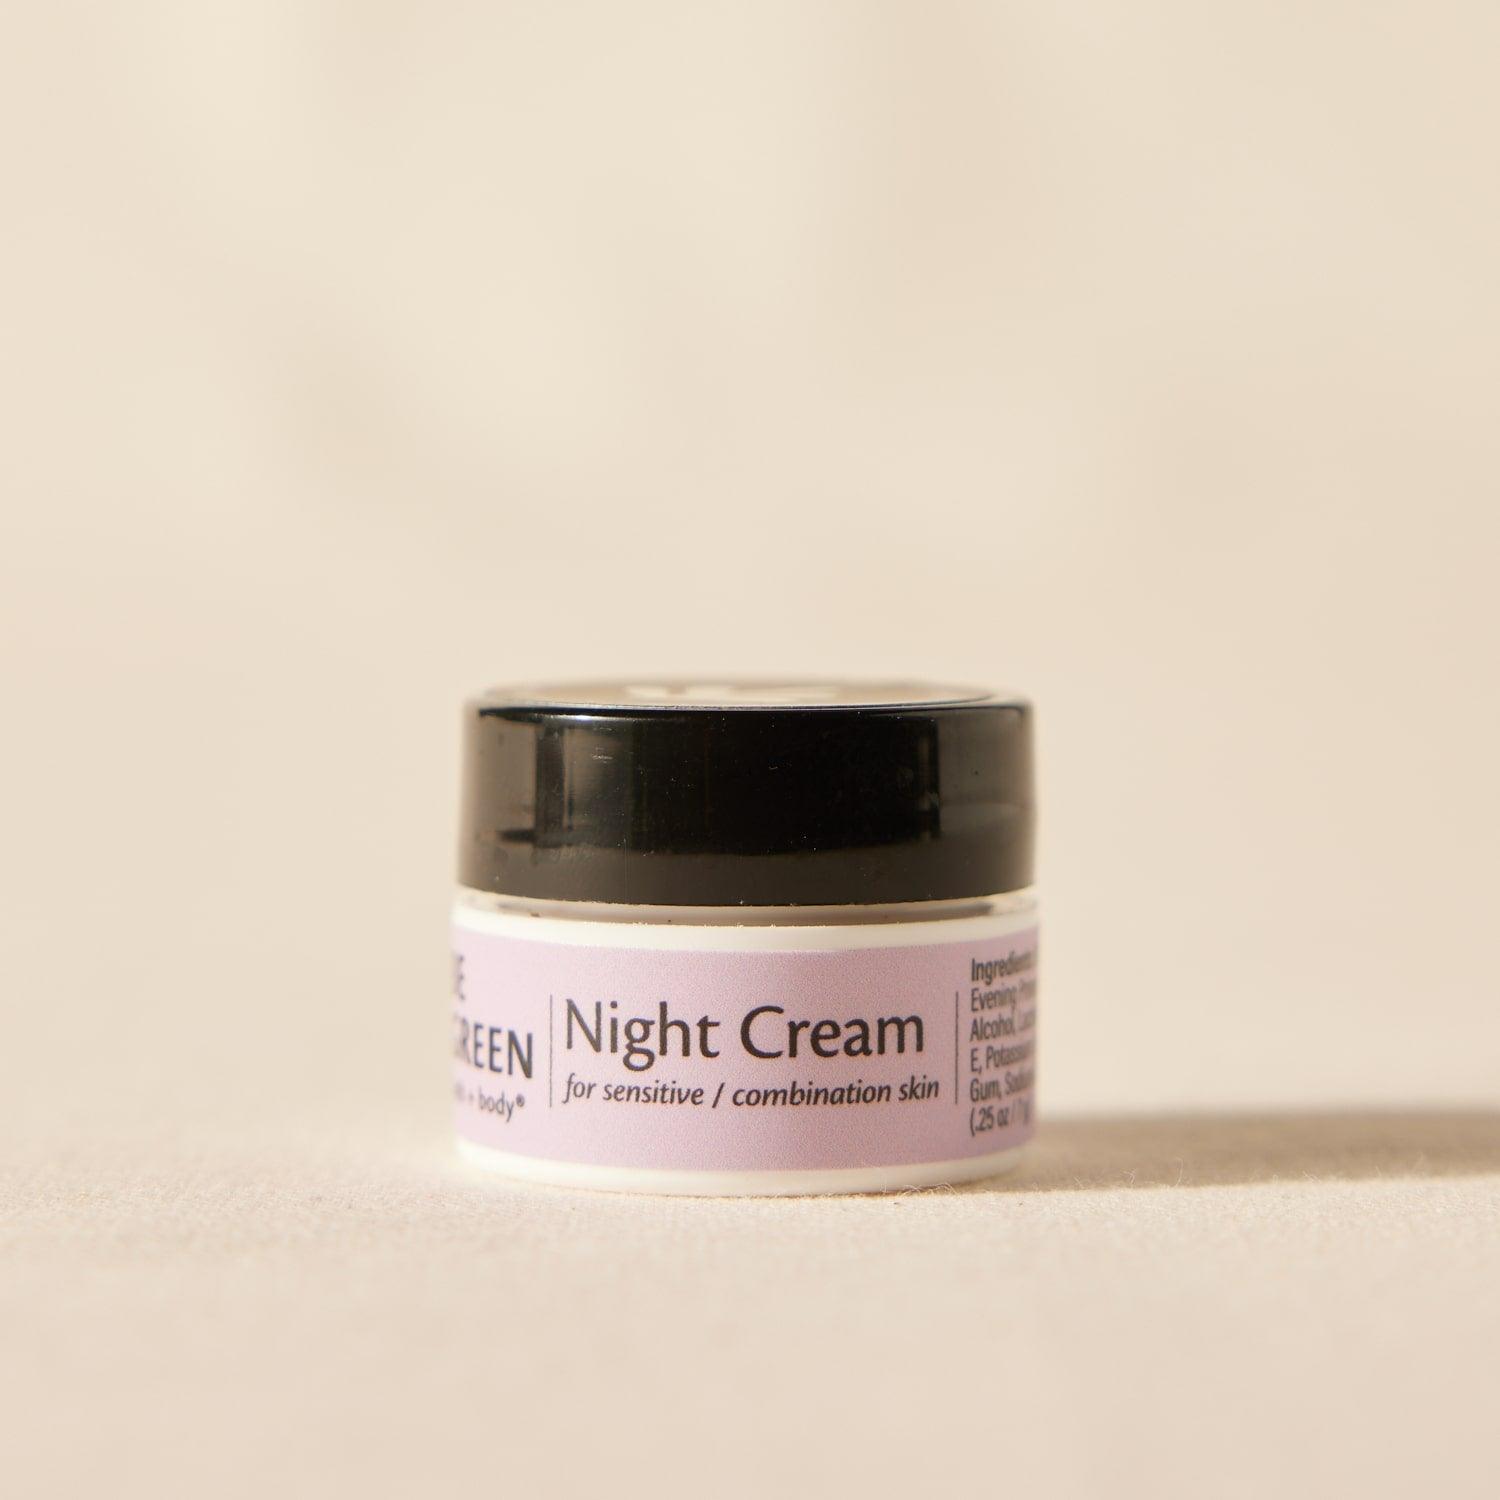 Trial size night cream for sensitive skin with organic ingredients